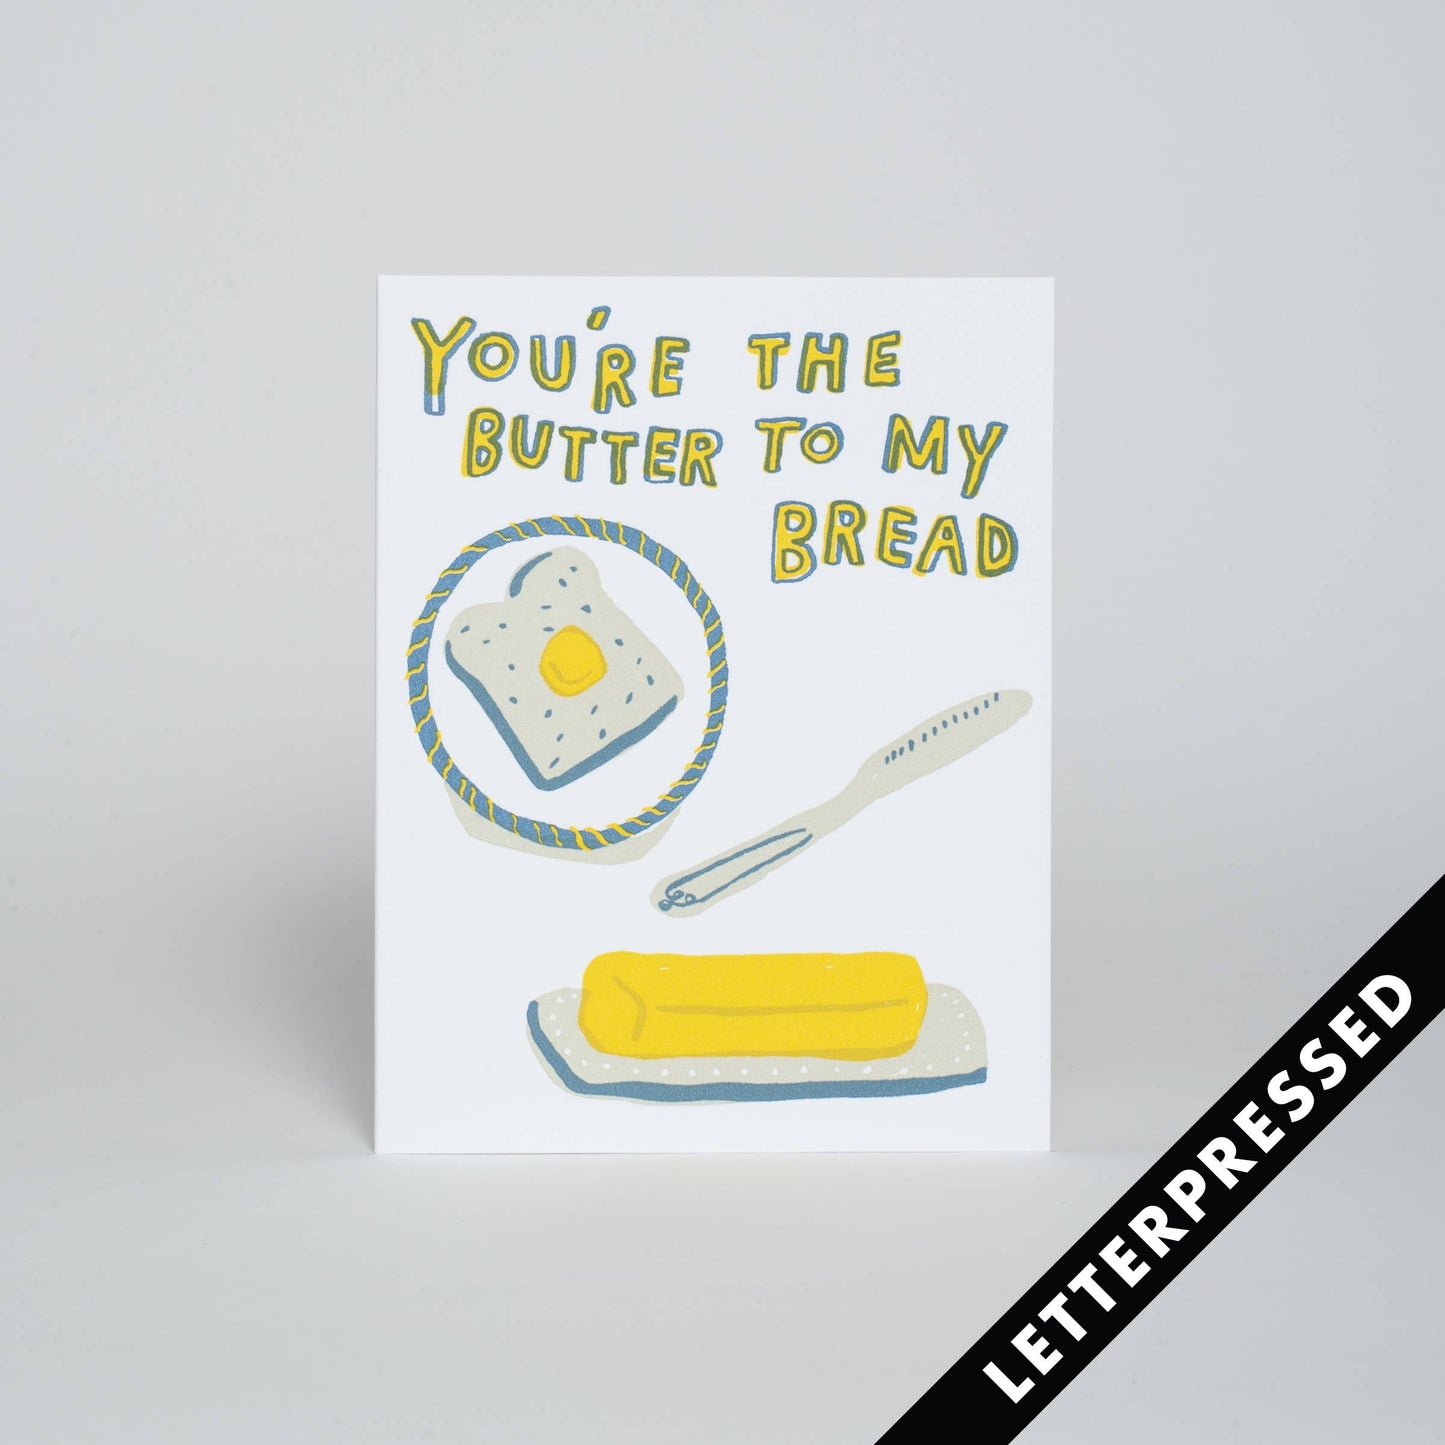 Greeting card that reads "You're the butter to my bread" up top. Images on the card include a slice of toast with butter on a plate, butter knife and stick of butter. 